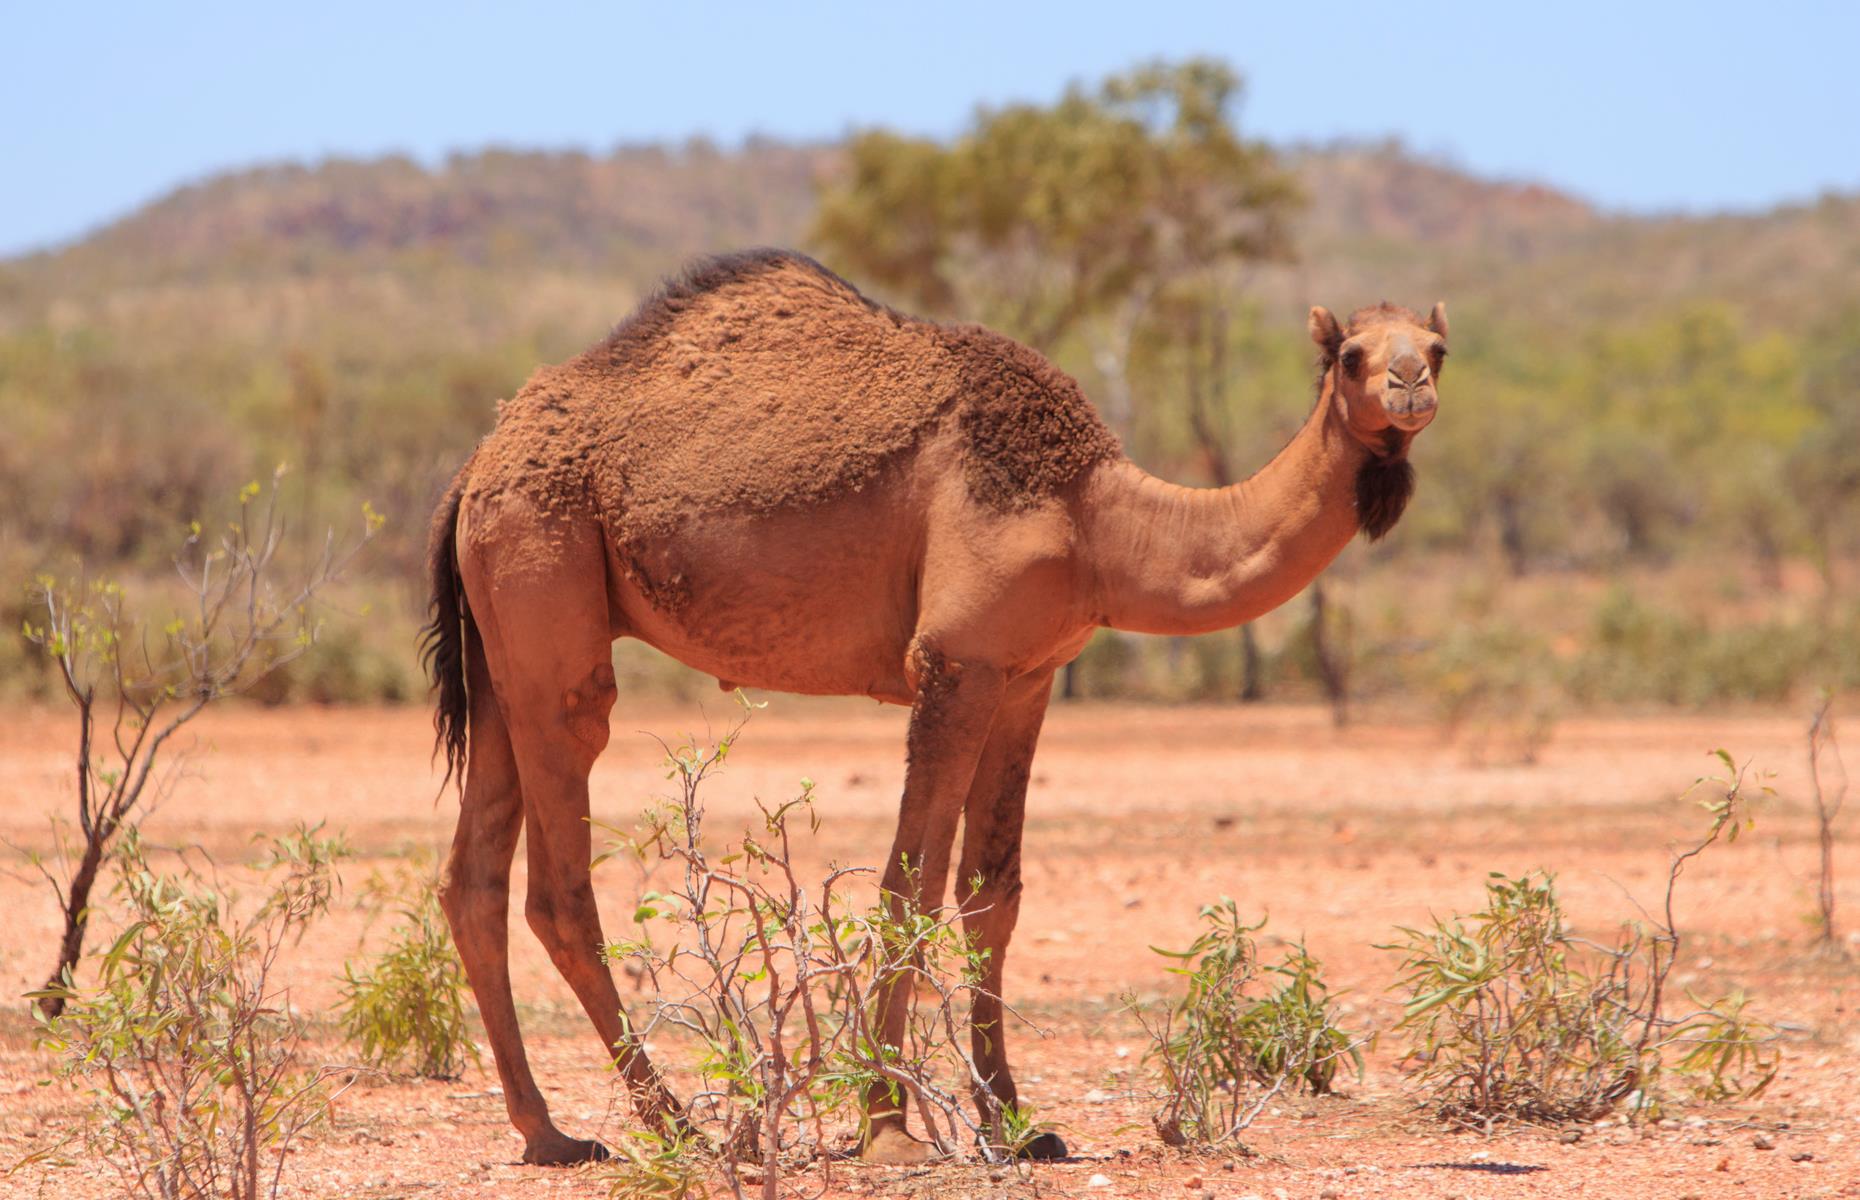 <p>Another feral animal that has unexpectedly become part of Australia's scenery is the camel. It's thought a million of the dromedary (one-humped) camel roam around the dusty outback, although this figure increases dramatically every year. Between 1870 and 1920, as many as 20,000 camels were imported by British Settlers from the Arabian Peninsula, India and Afghanistan. Along with them came thousands of cameleers from the same regions to transport goods and people across the sun-scorched center. With the advent of motorized transport, the camels were released into the wild and thrived.</p>